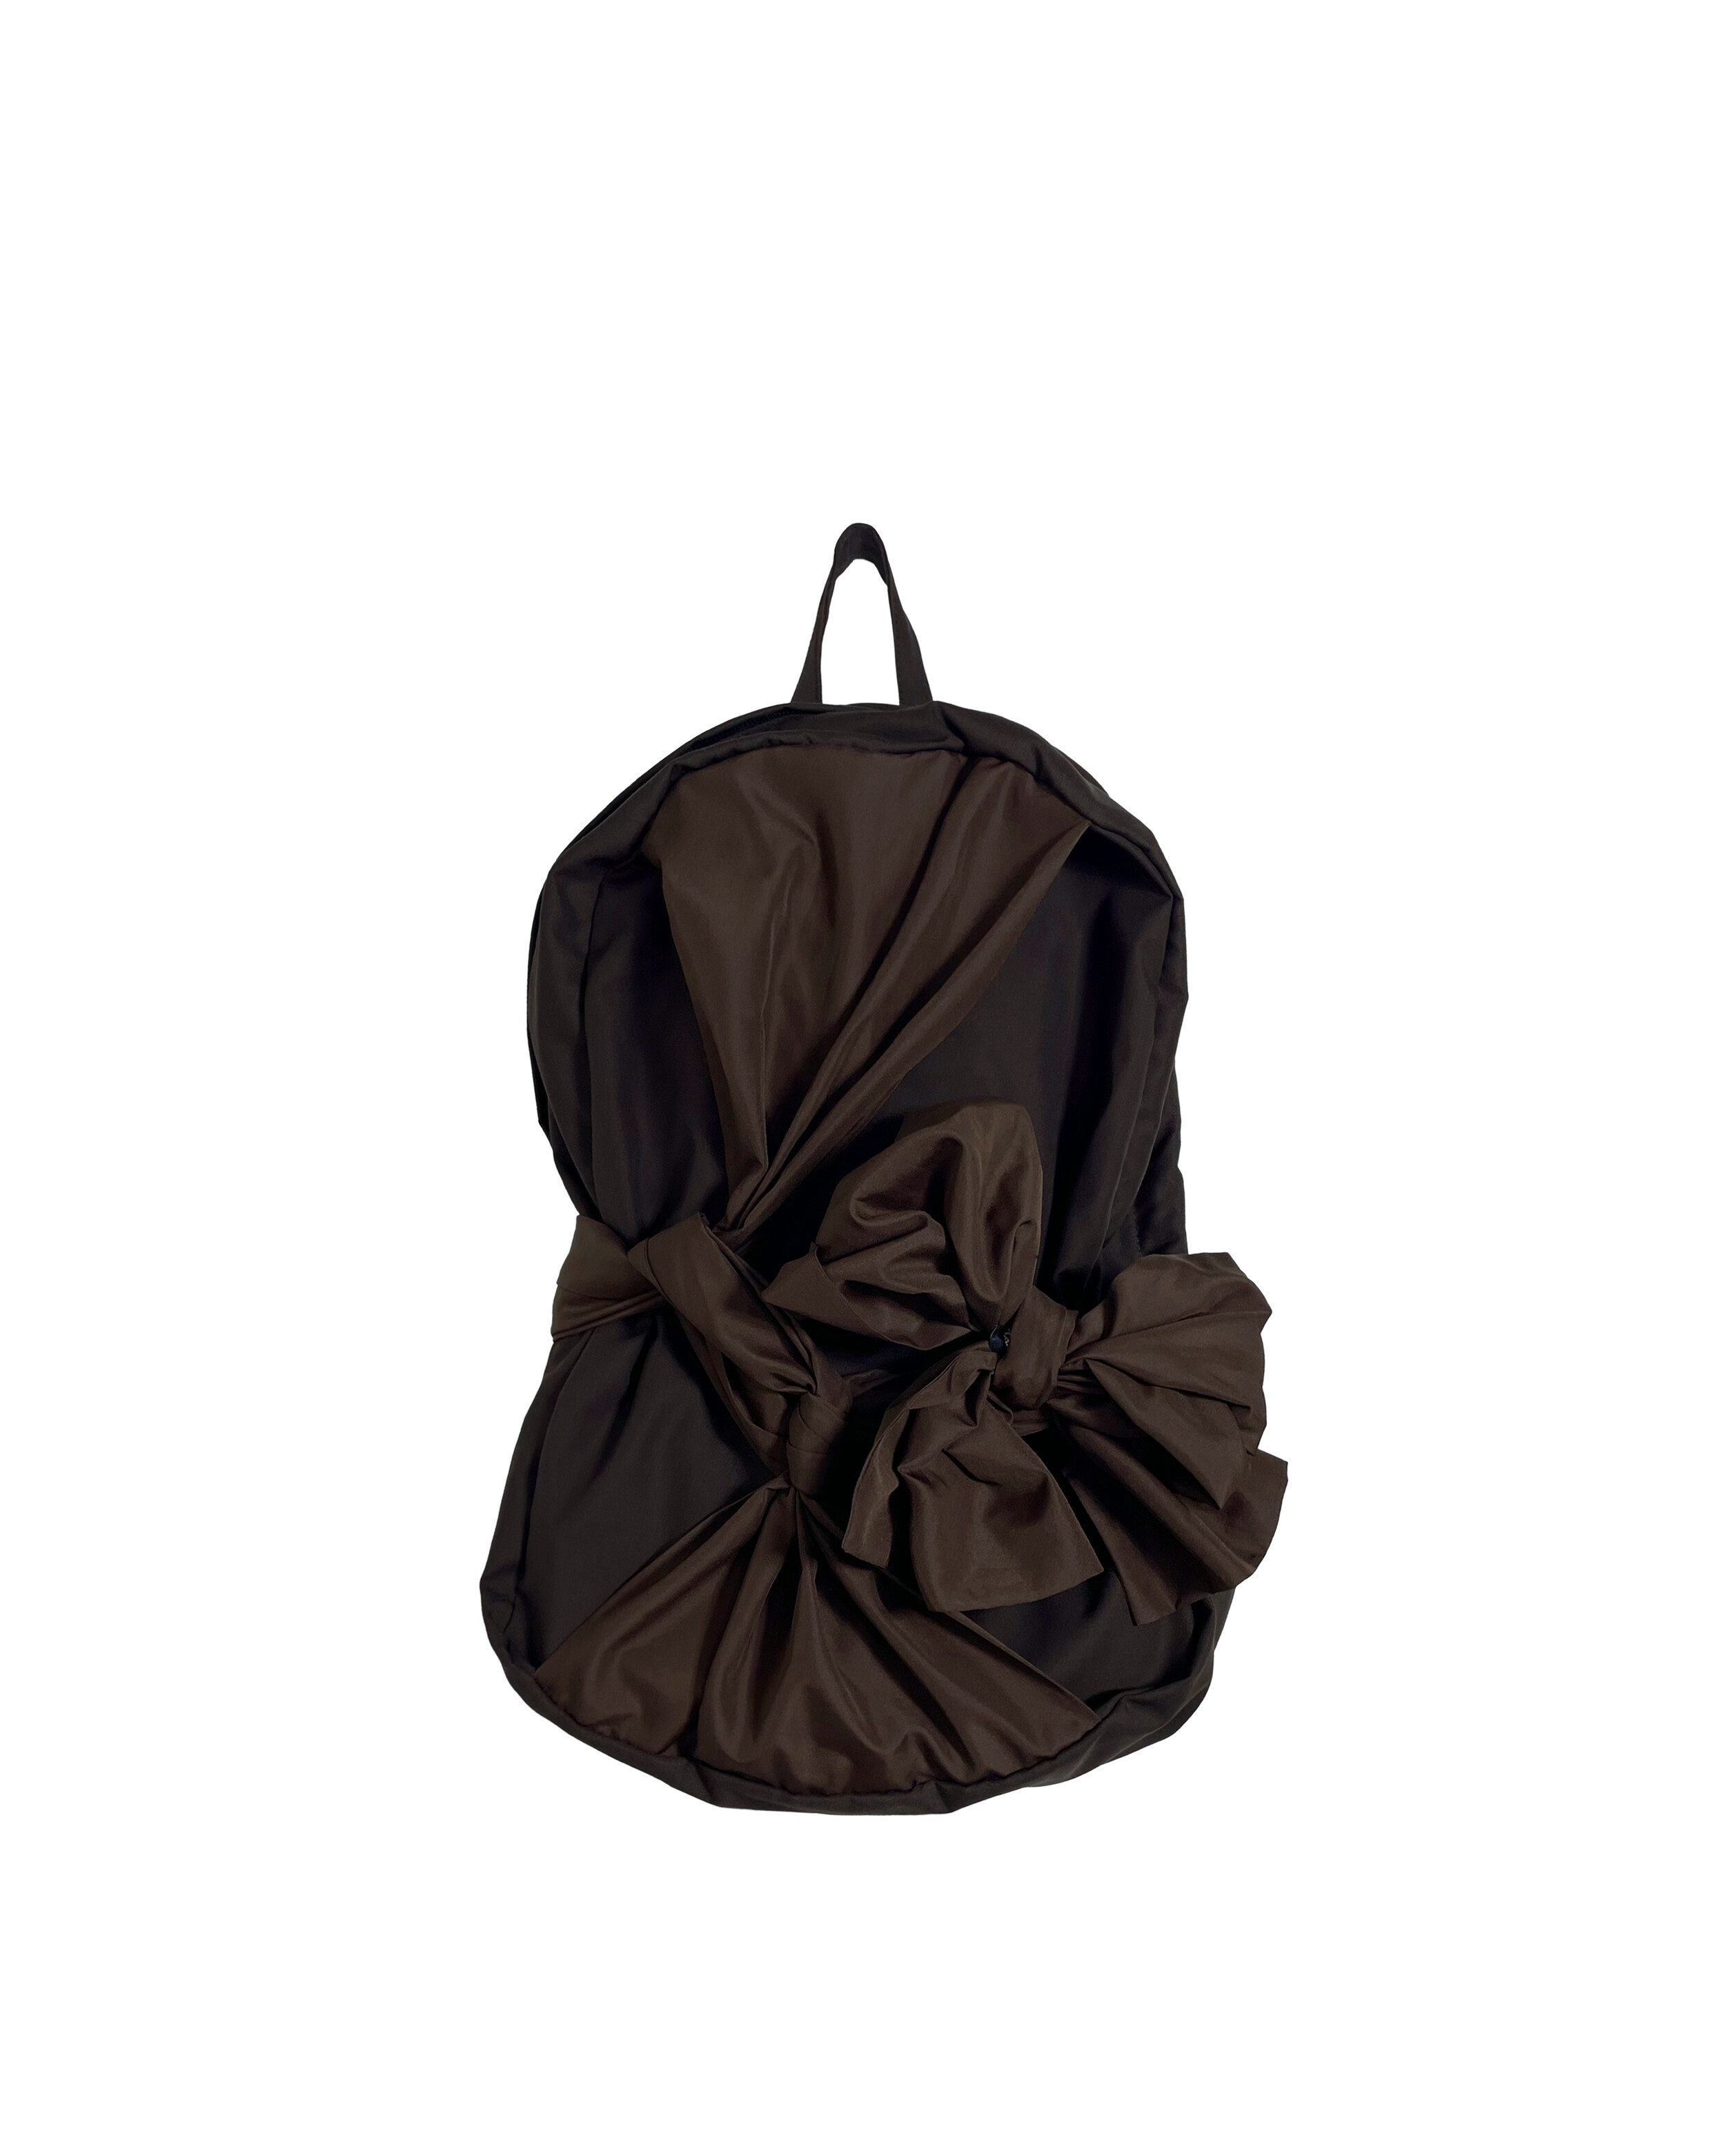 Knotted Backpack (brown)